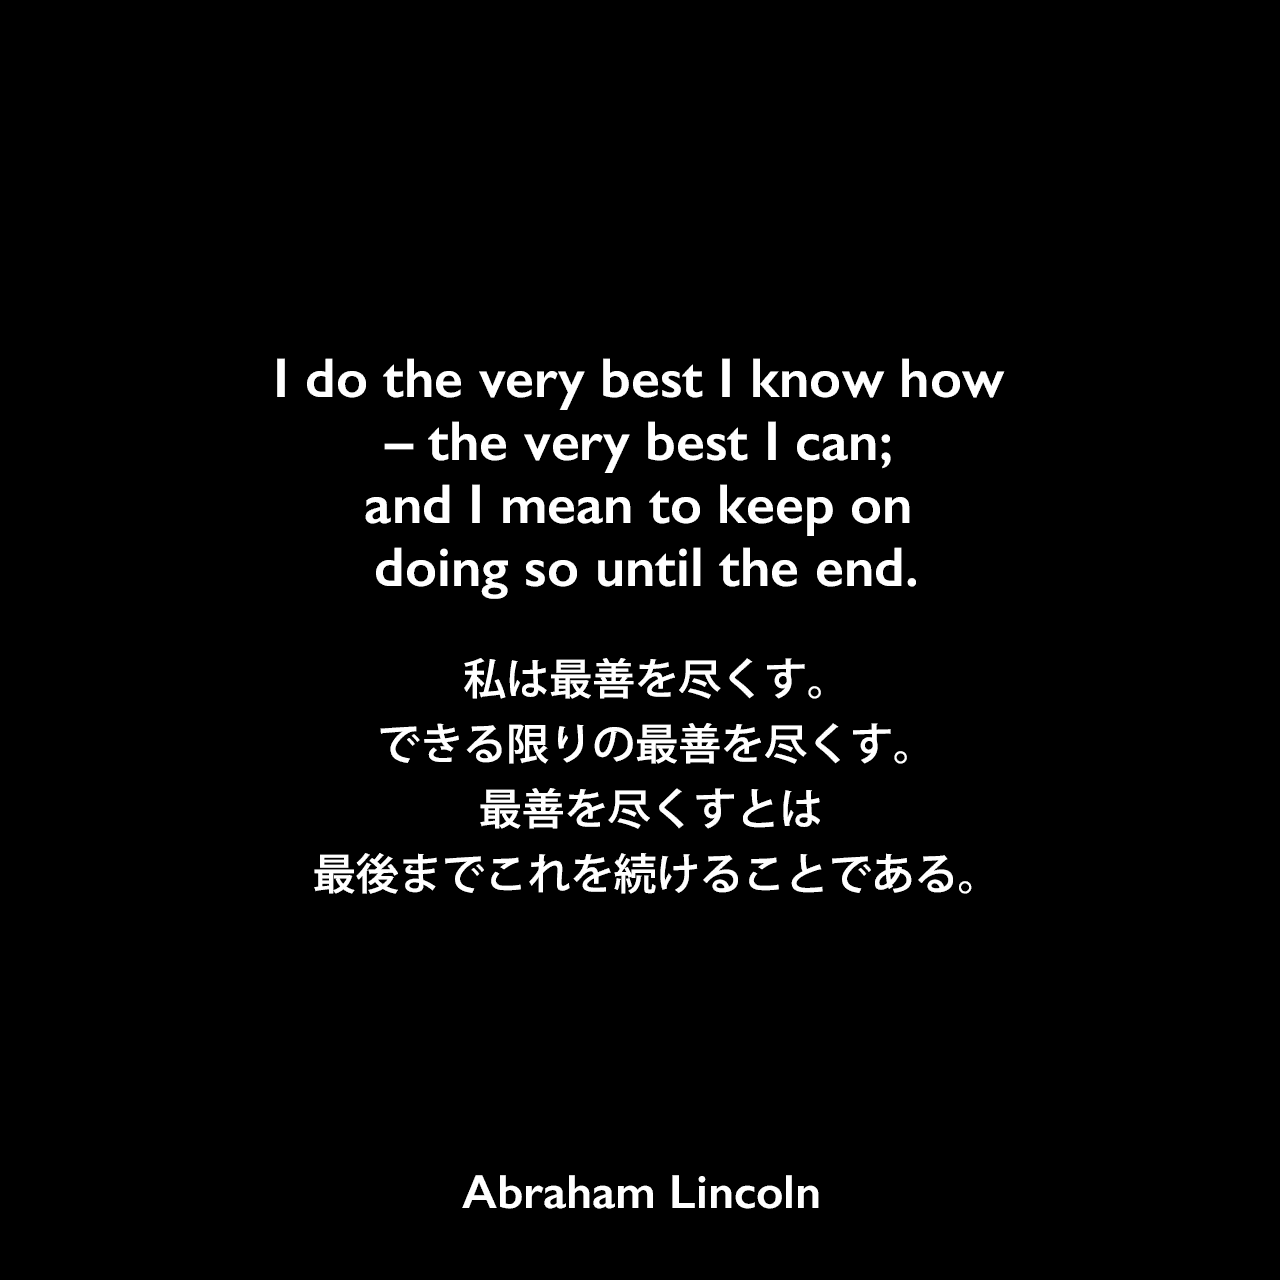 I do the very best I know how – the very best I can; and I mean to keep on doing so until the end.私は最善を尽くす。できる限りの最善を尽くす。 最善を尽くすとは、最後までこれを続けることである。- Henry J. Raymondの本「The Life and Public Service of Abraham Lincoln」よりAbraham Lincoln